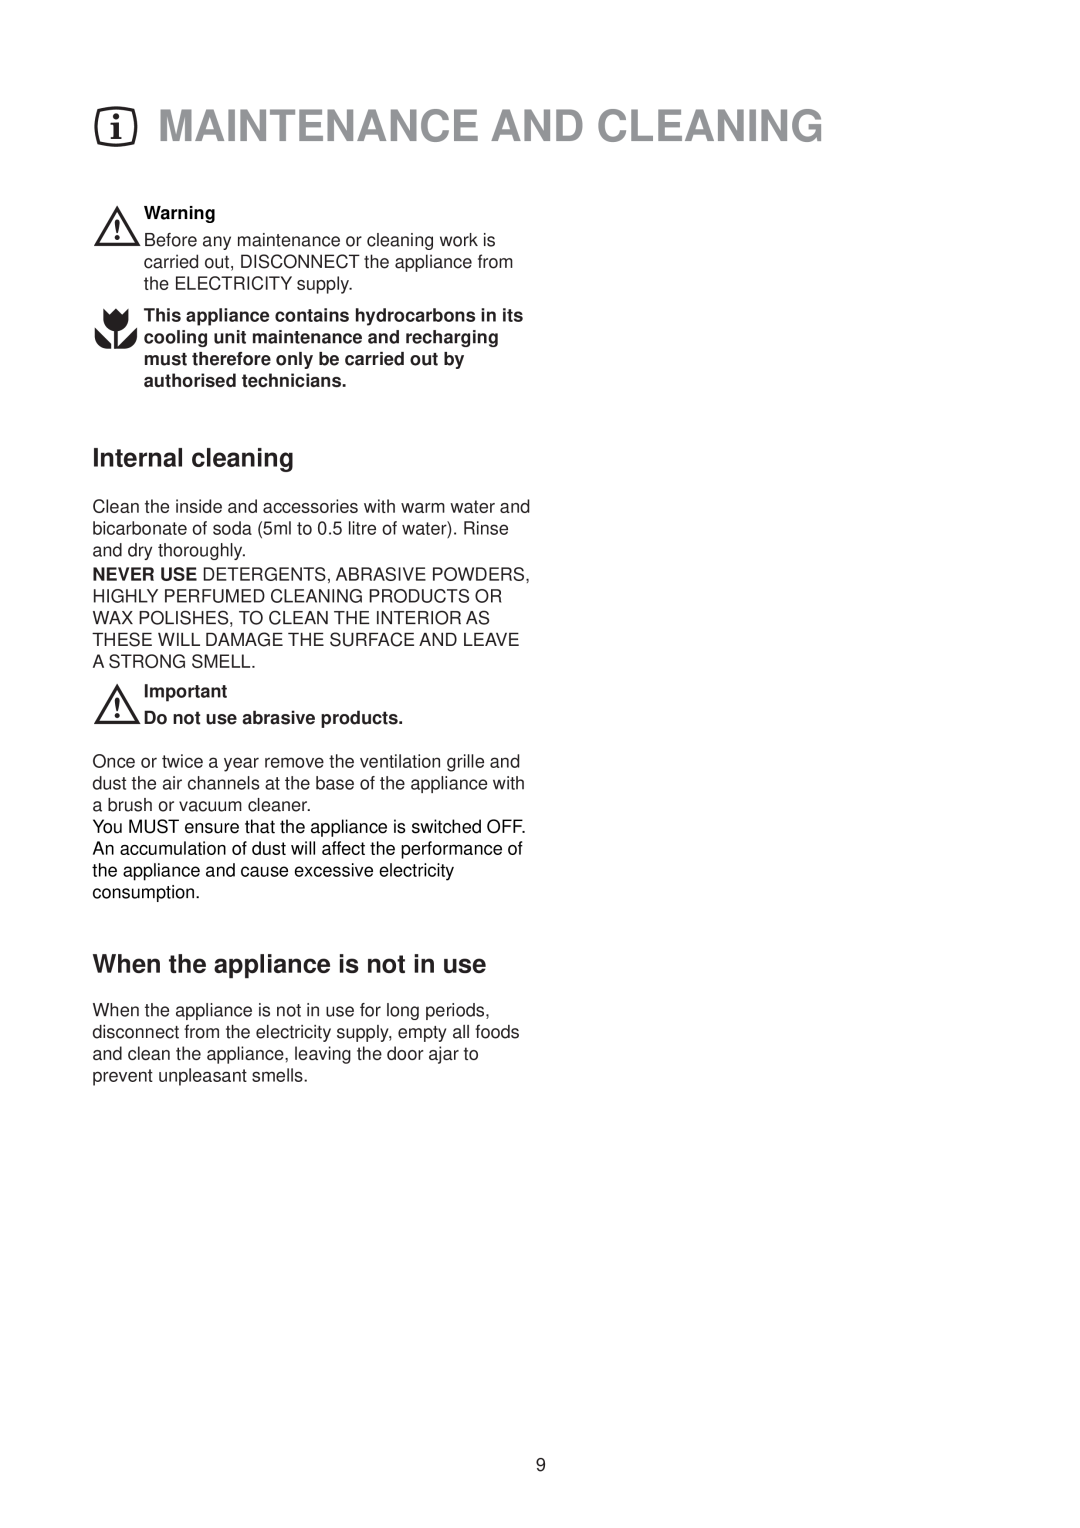 Electrolux EU 6233 manual Maintenance And Cleaning, Internal cleaning, When the appliance is not in use 